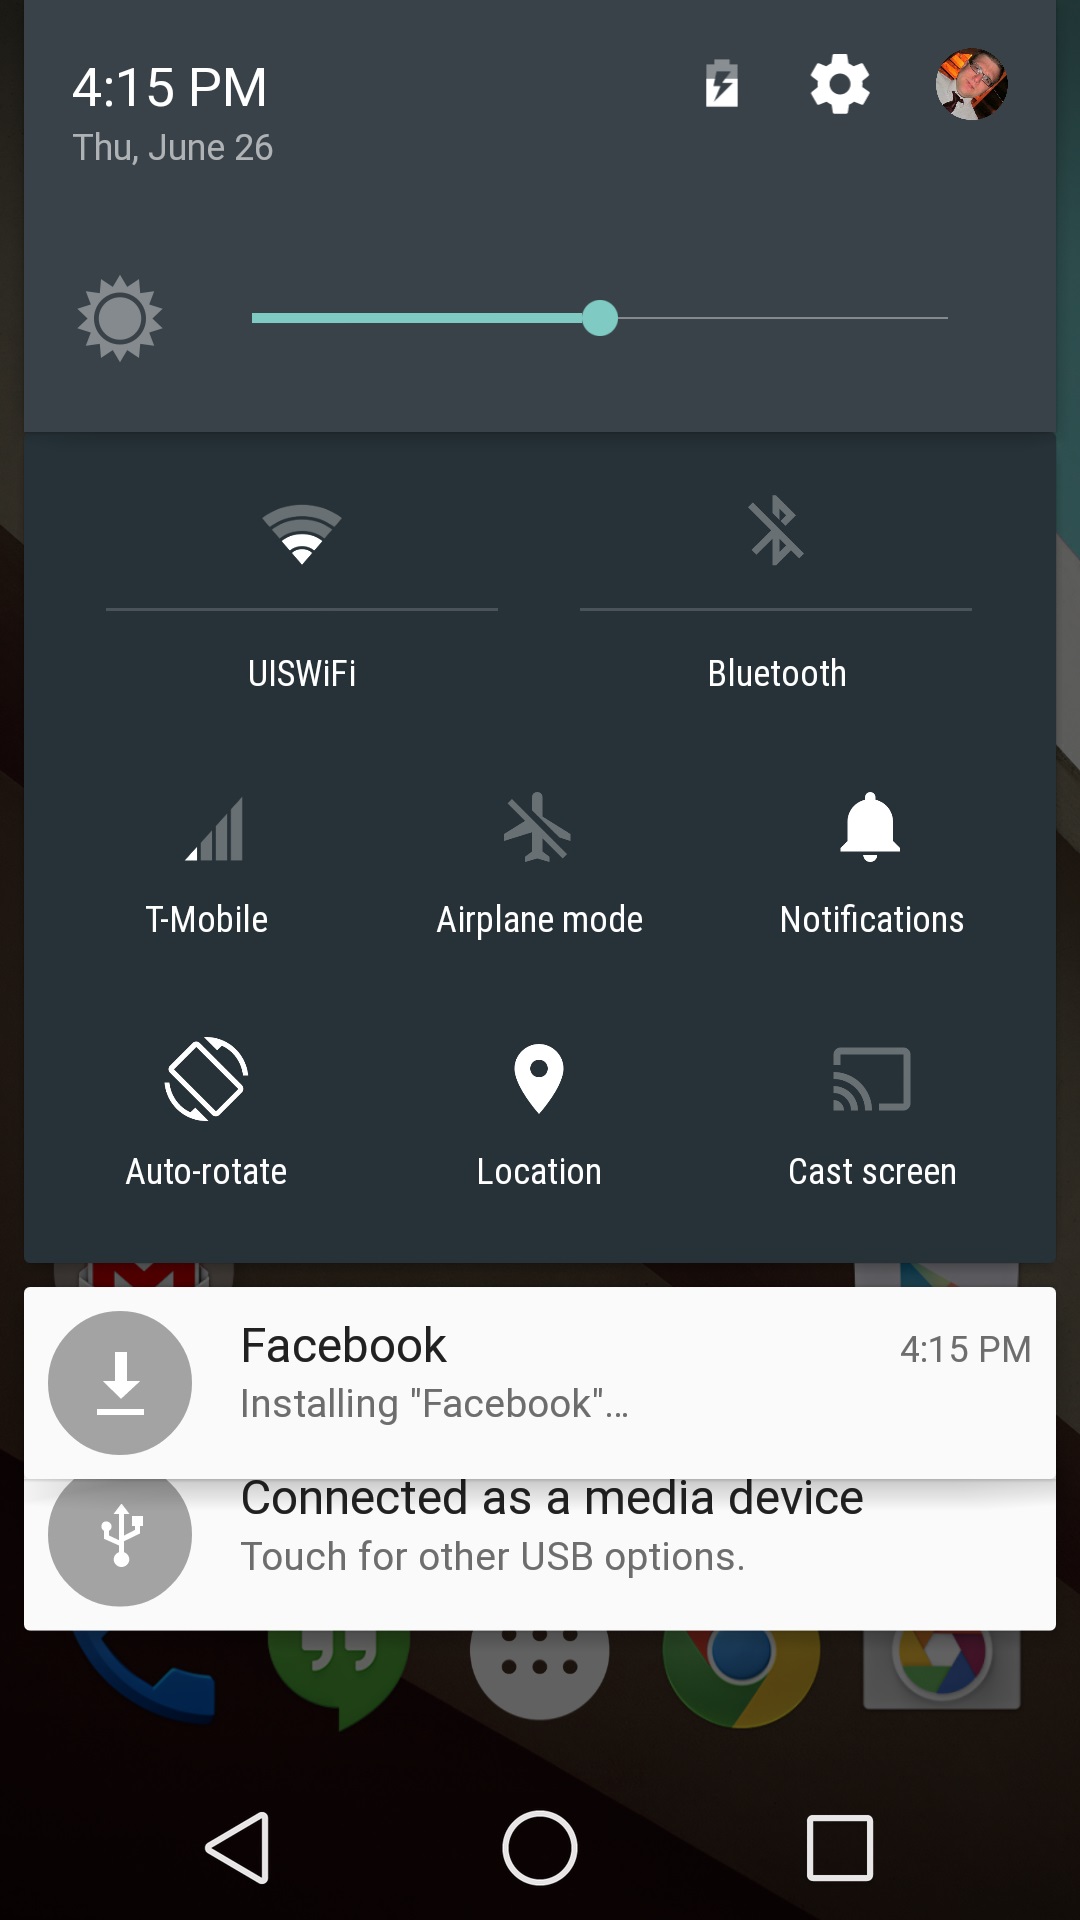 Notifications in Android L - for some reason we don't have an alt tag here